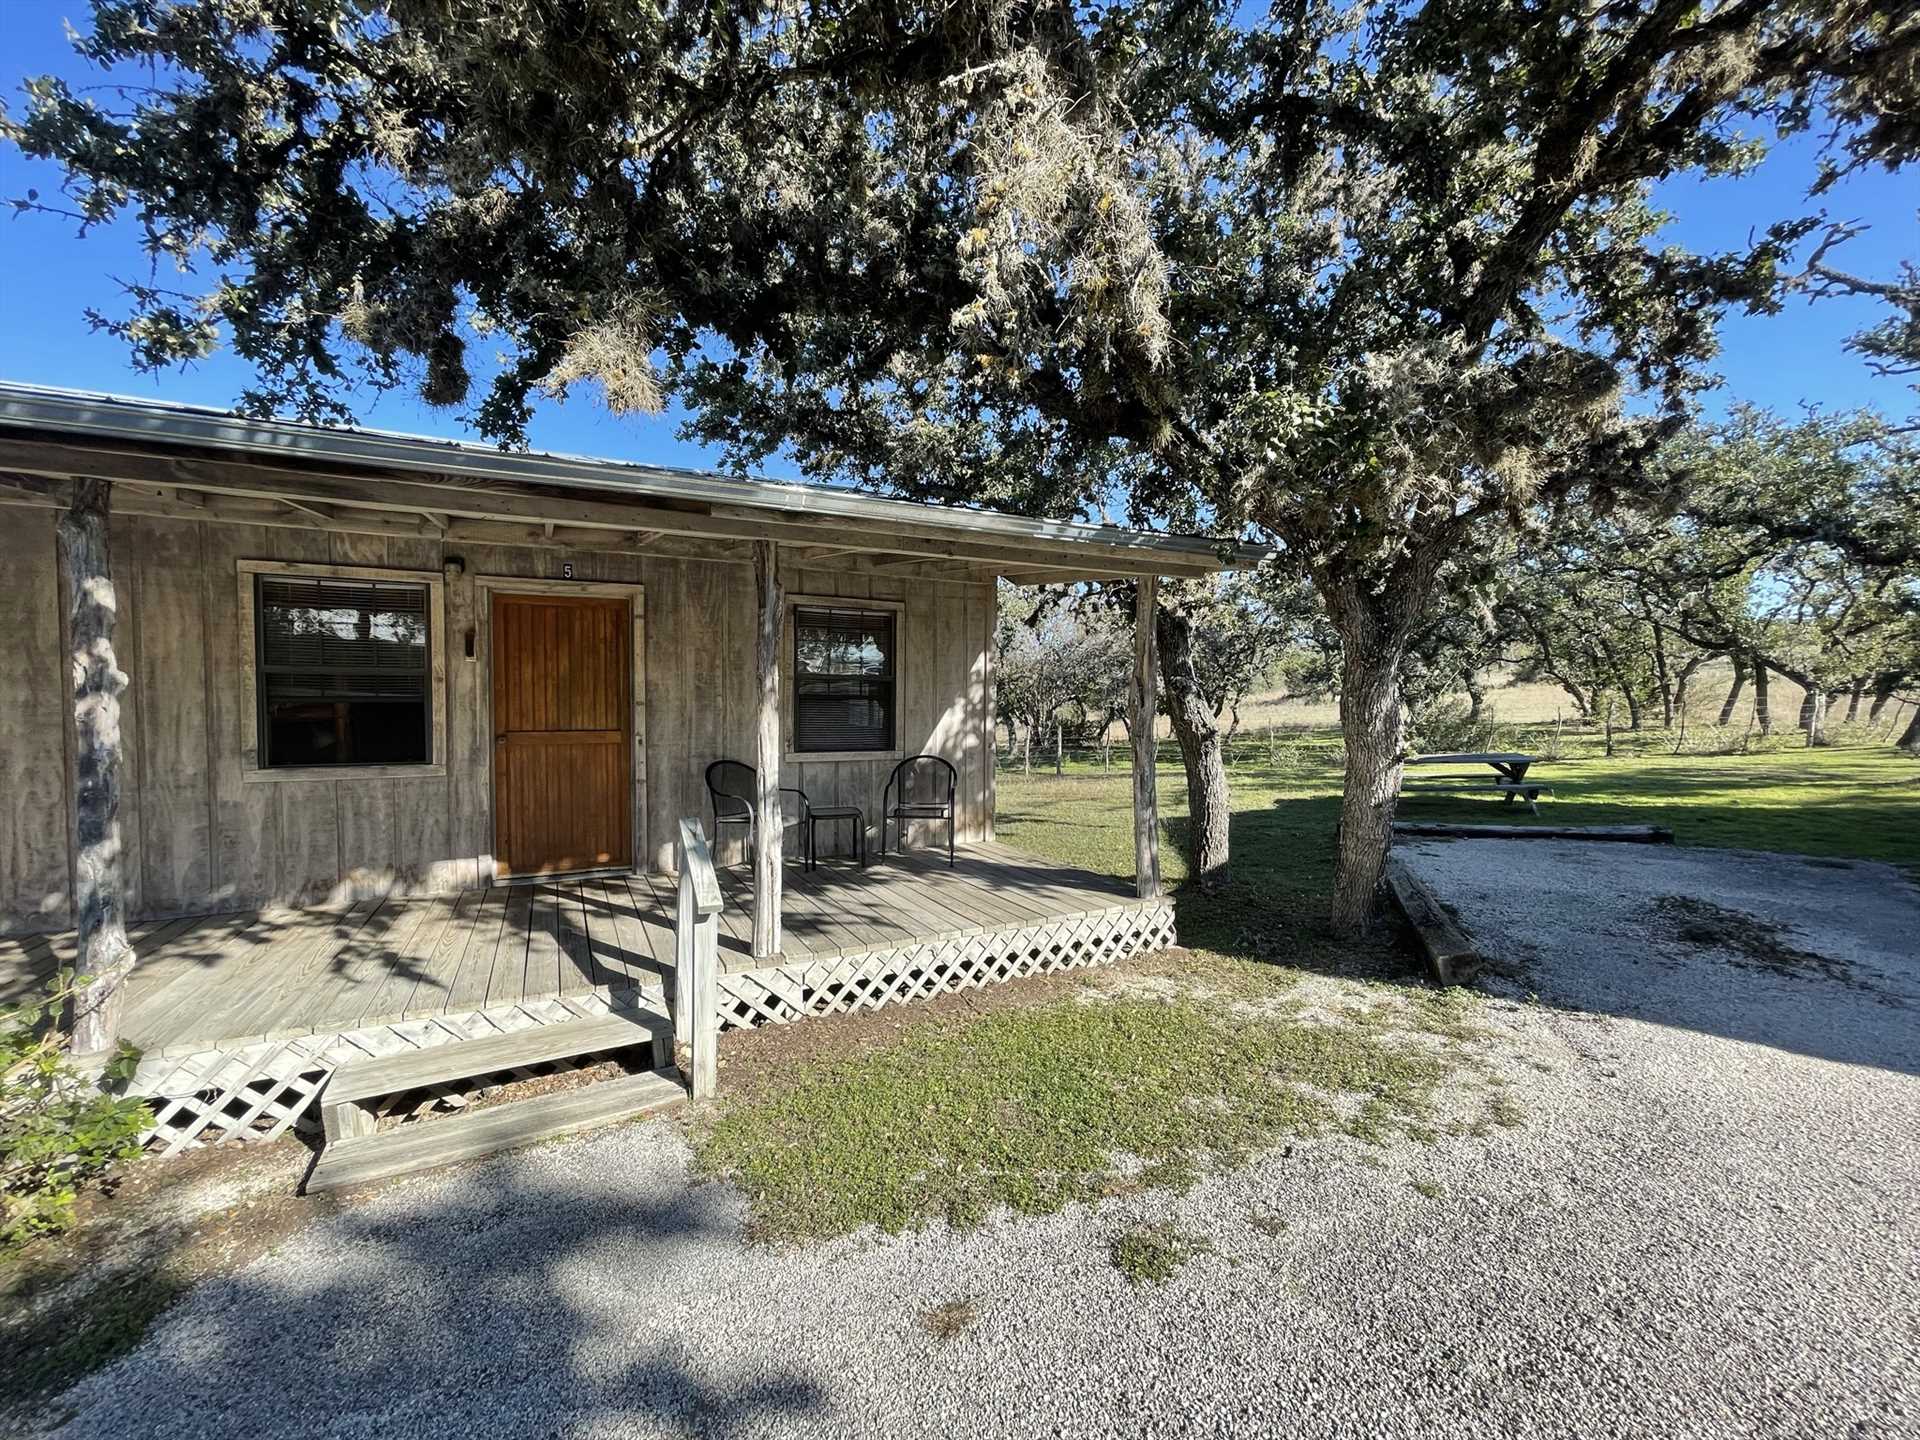                                                 Your peaceful and refreshing Hill Country getaway awaits you at the Red Oak Room #5 on the spacious and beautiful West 1077 Guest Ranch!